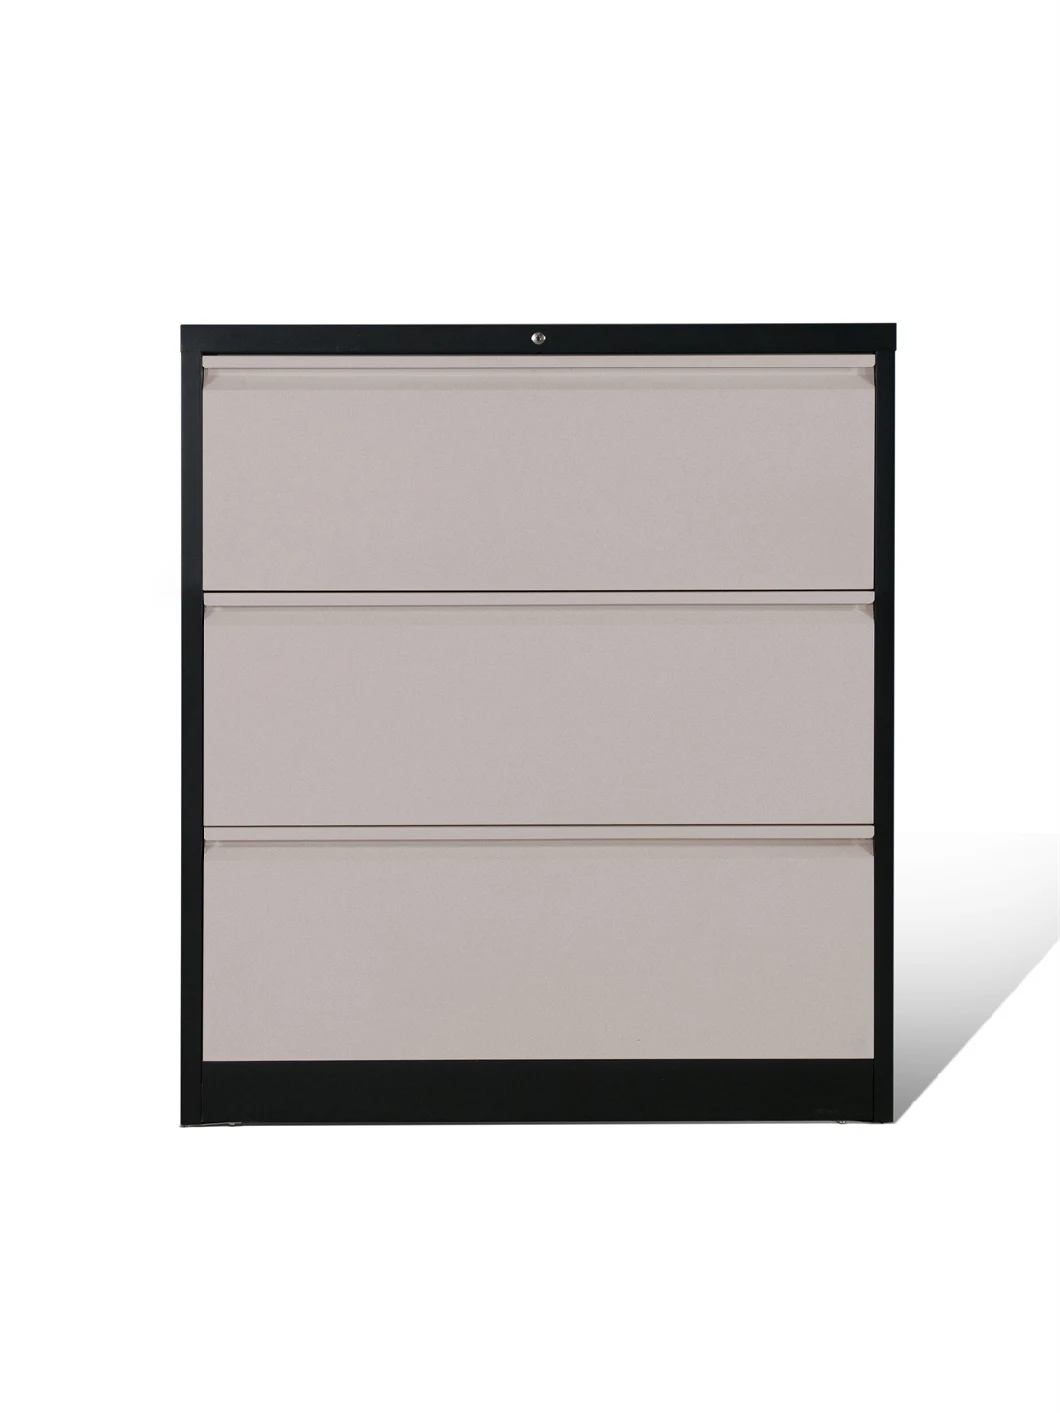 Metal 3 Drawer Lateral File Cabinet Storage Unit